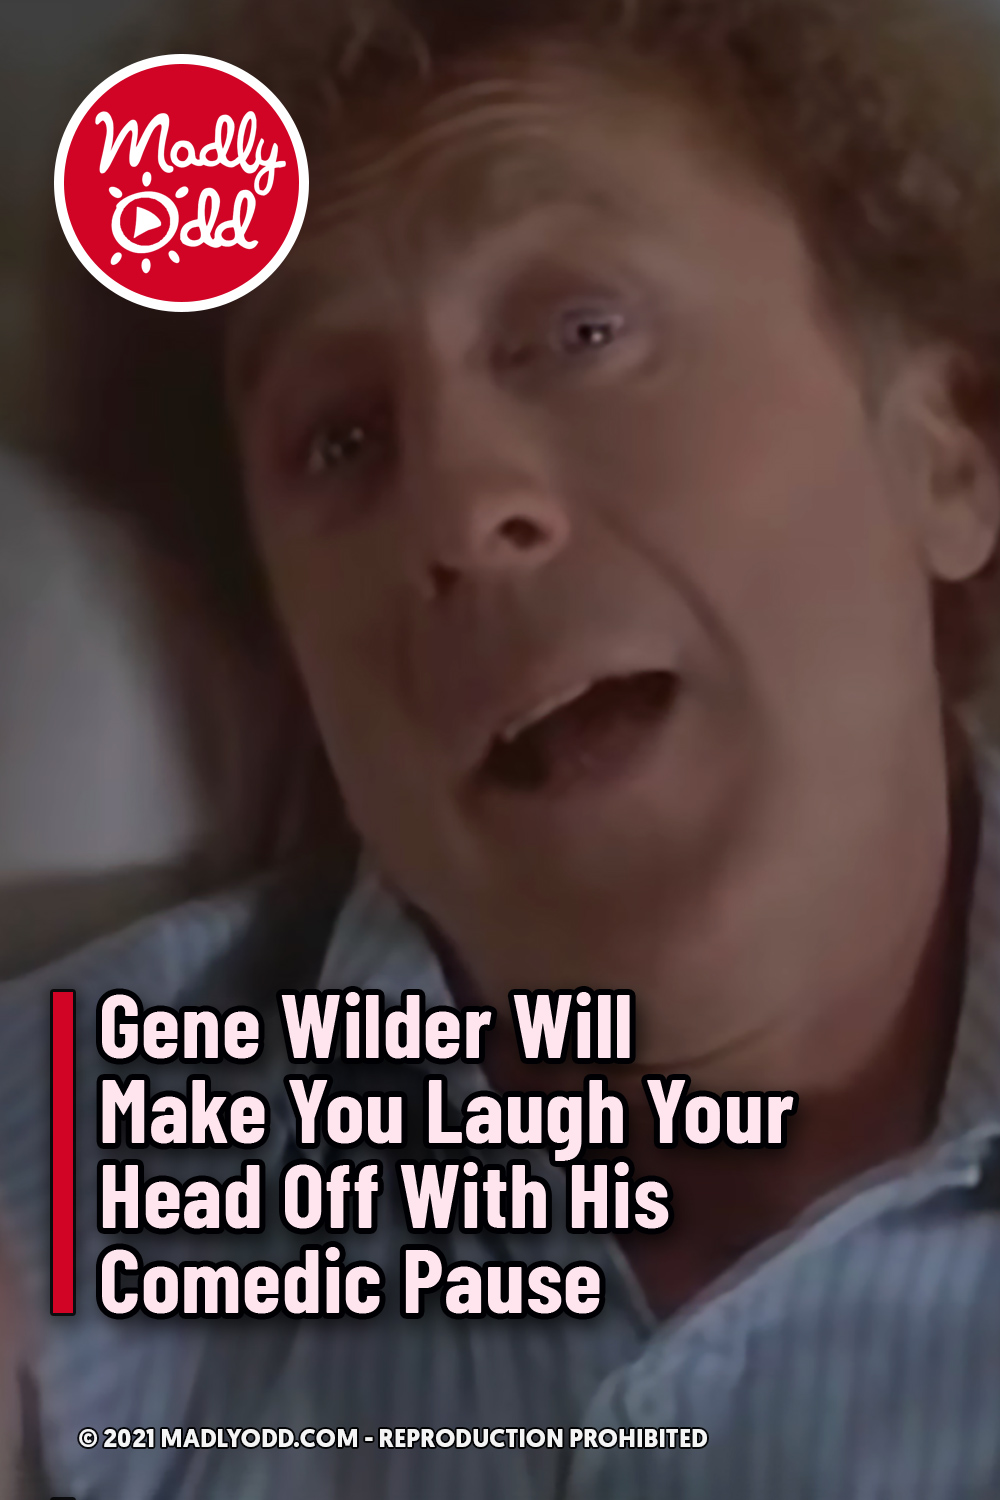 Gene Wilder Will Make You Laugh Your Head Off With His Comedic Pause